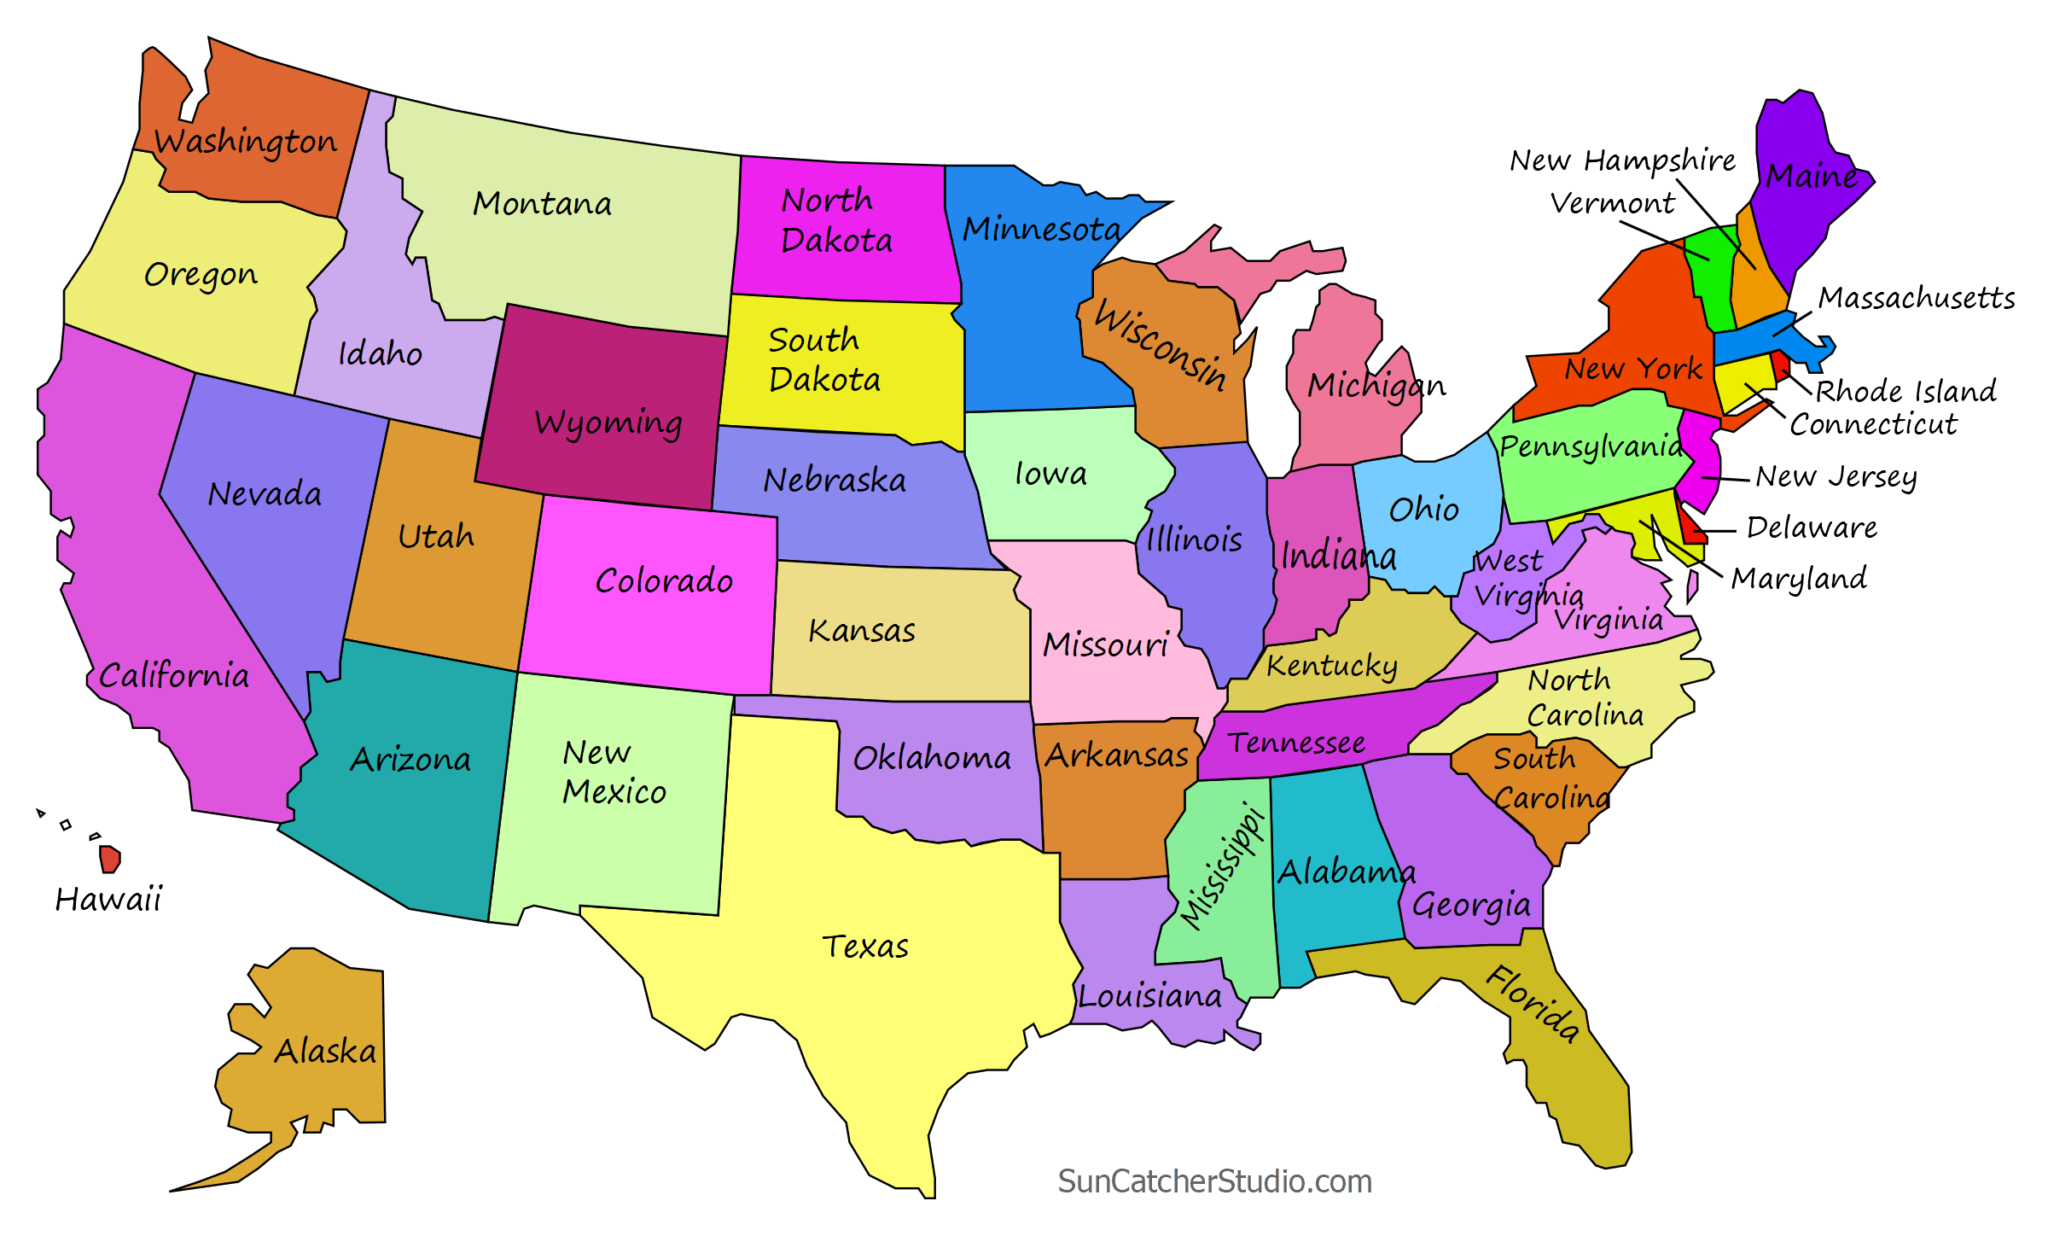 download-usa-map-states-and-names-free-images-www